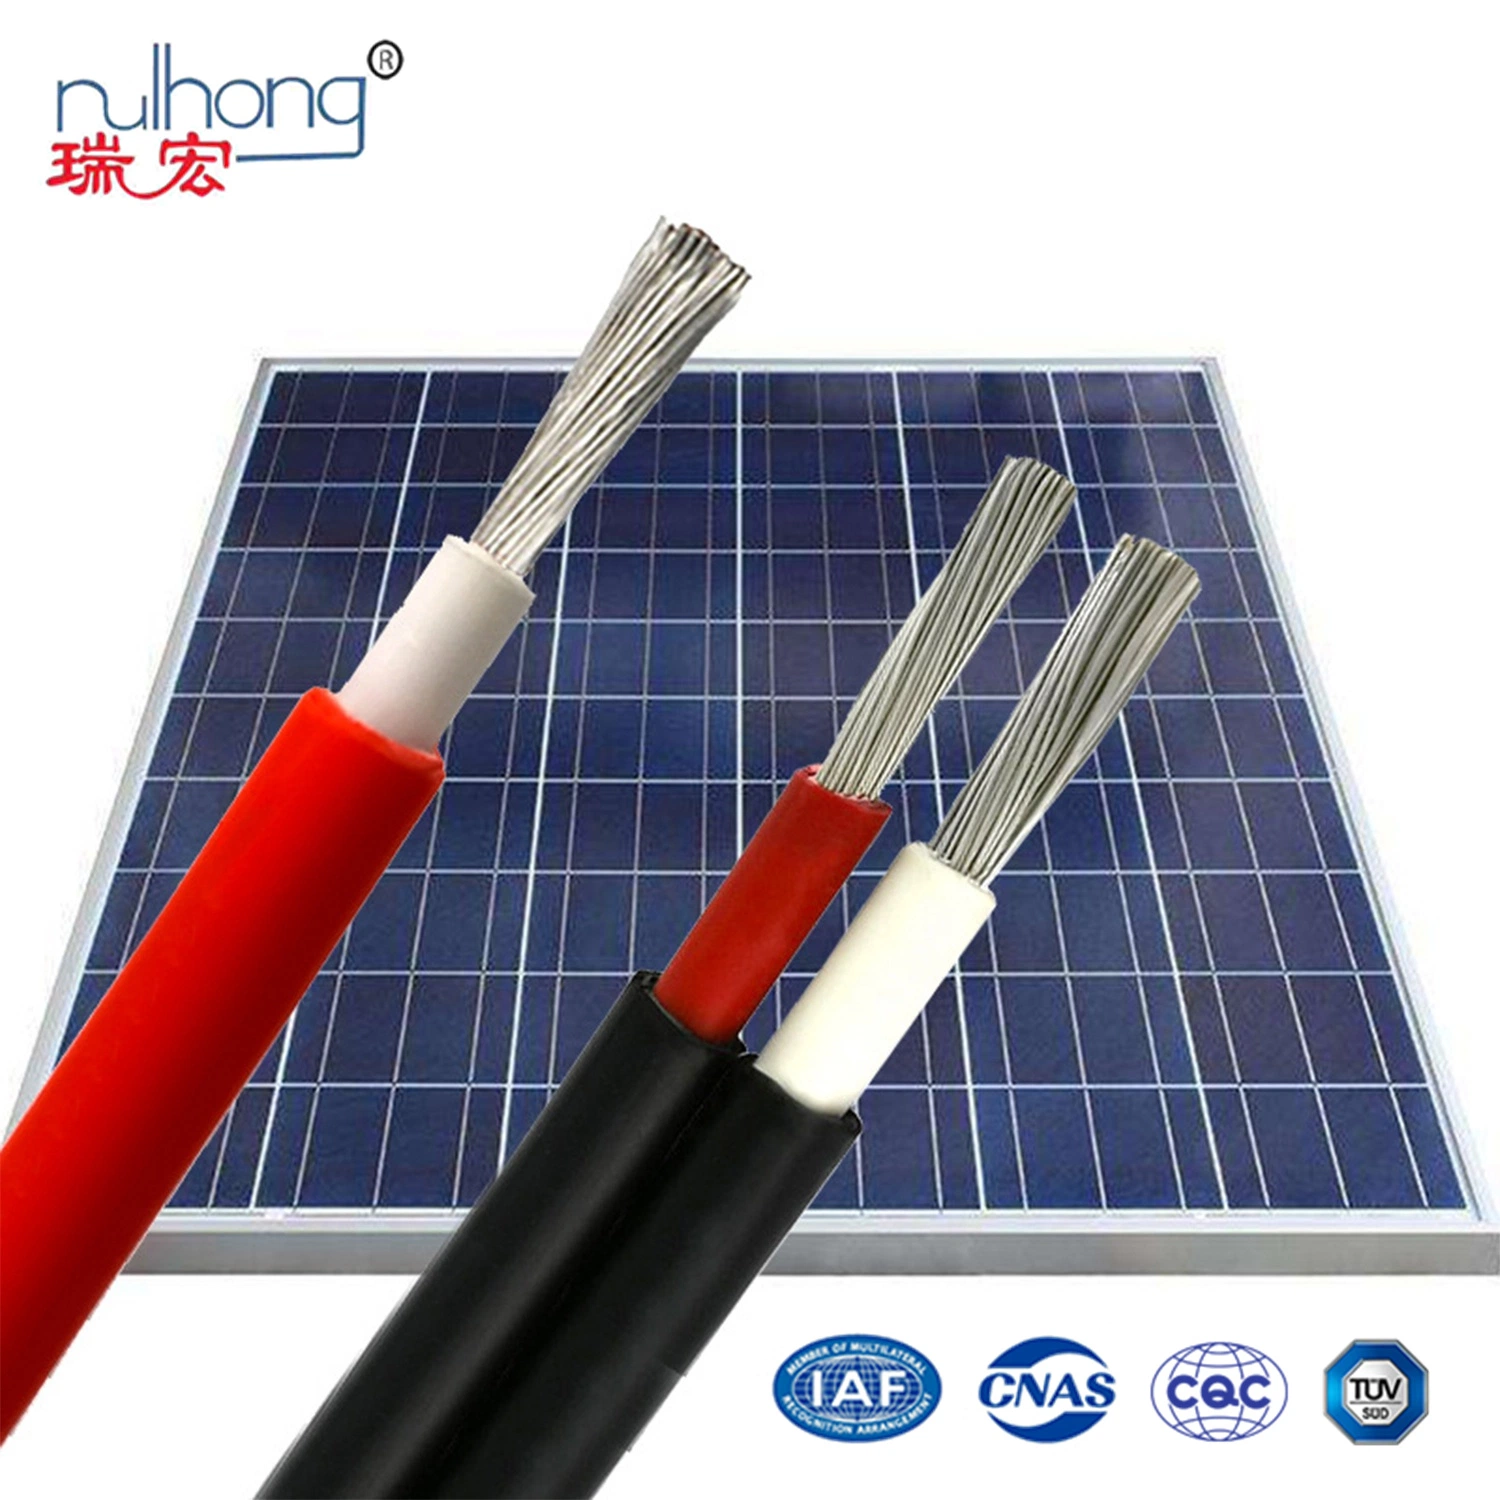 Wholesale/Supplier 4mm 6mm 10mm Tinner Copper Photovoltaic Solar DC Electric Wire Flexible Electrical PV Cable